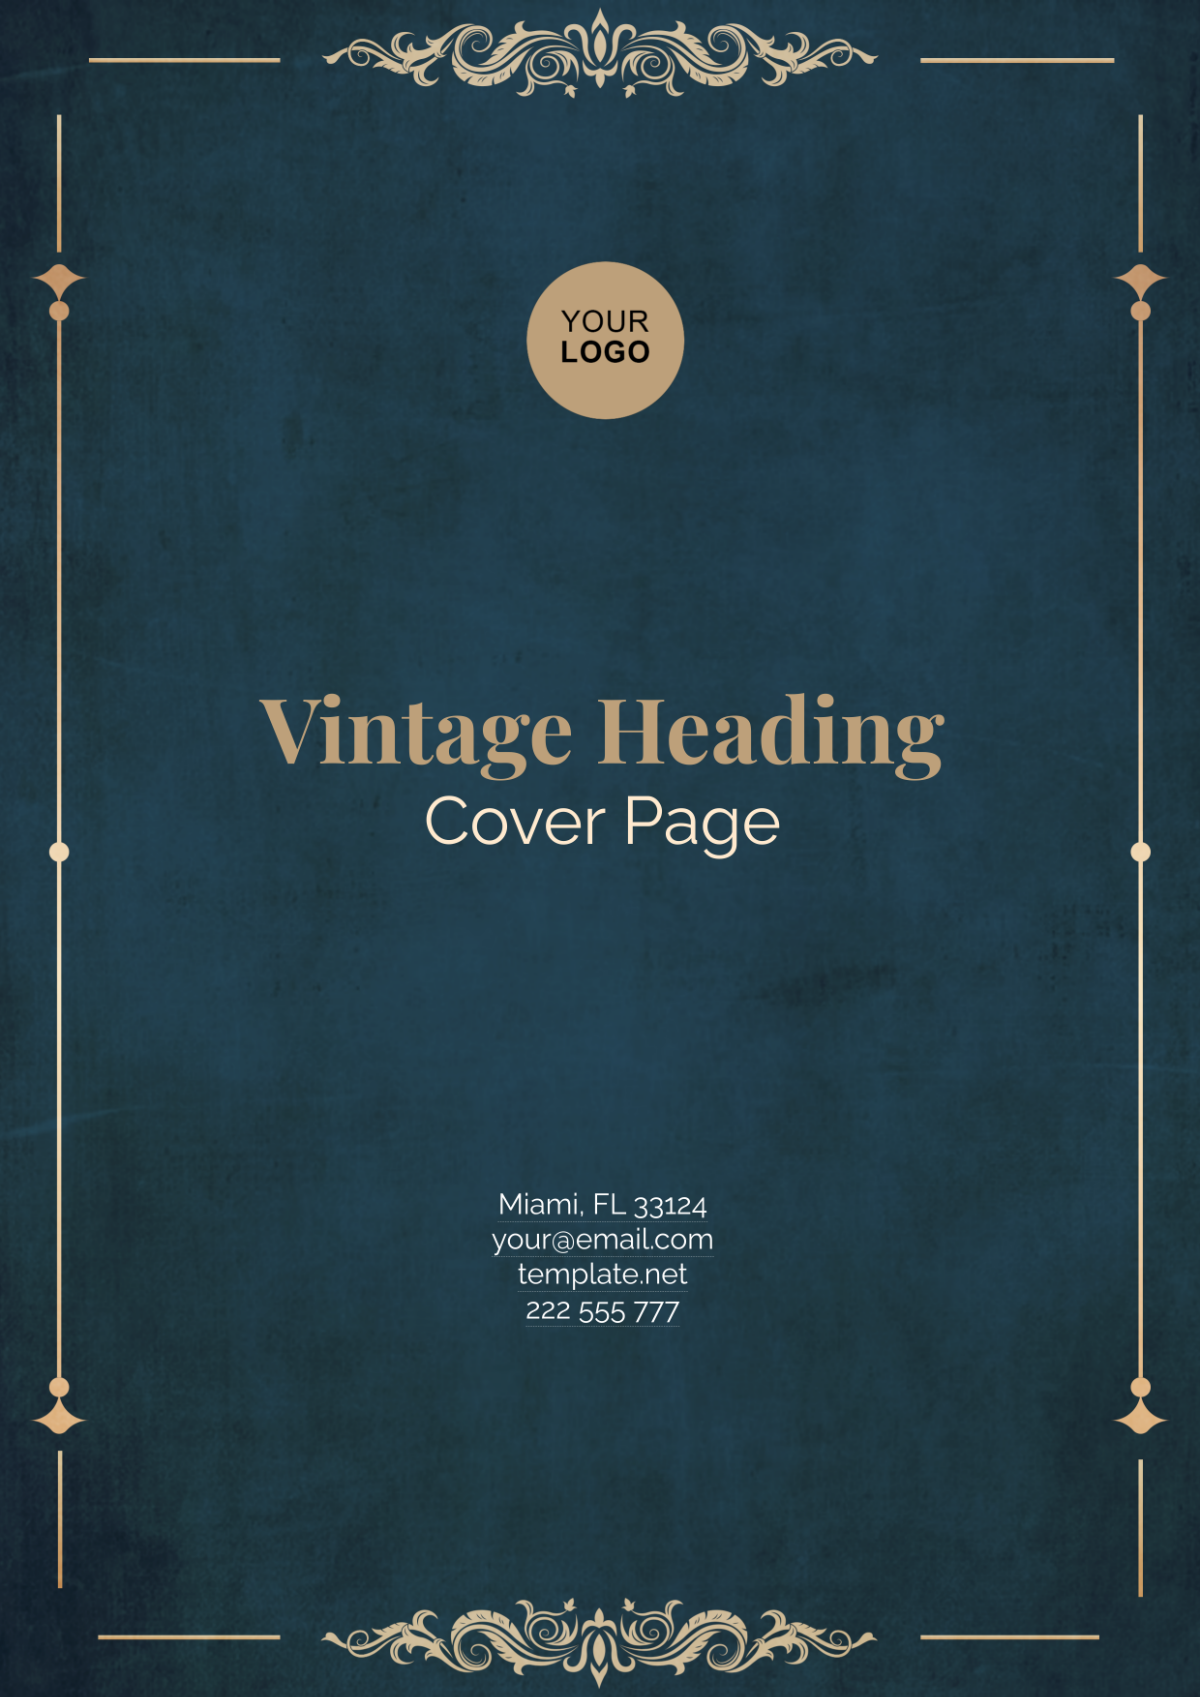 Vintage Heading Cover Page Template